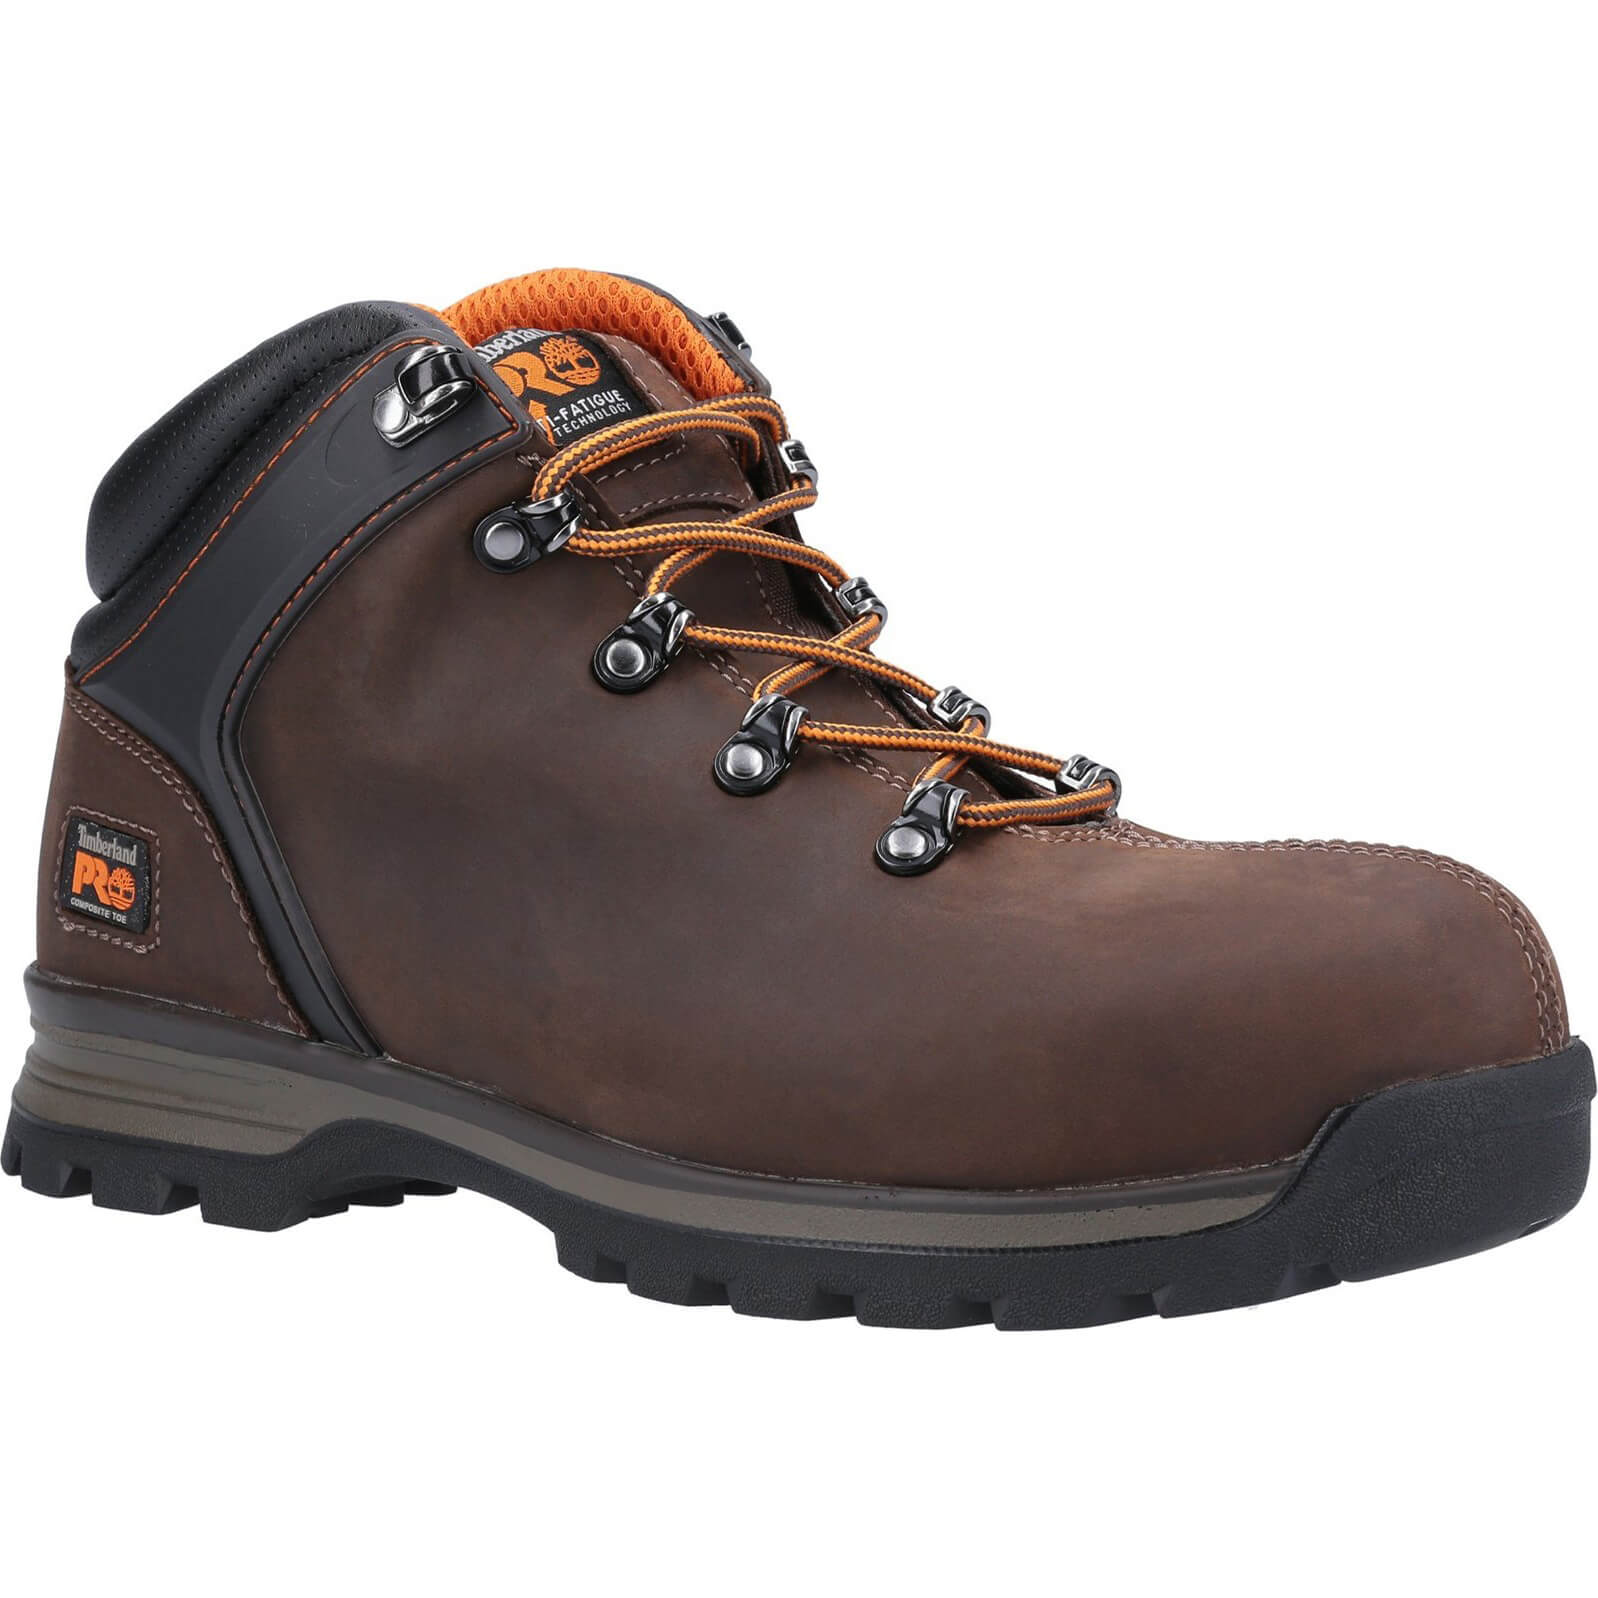 Timberland Pro Splitrock XT Composite Safety Toe Work Boot Brown Size 6